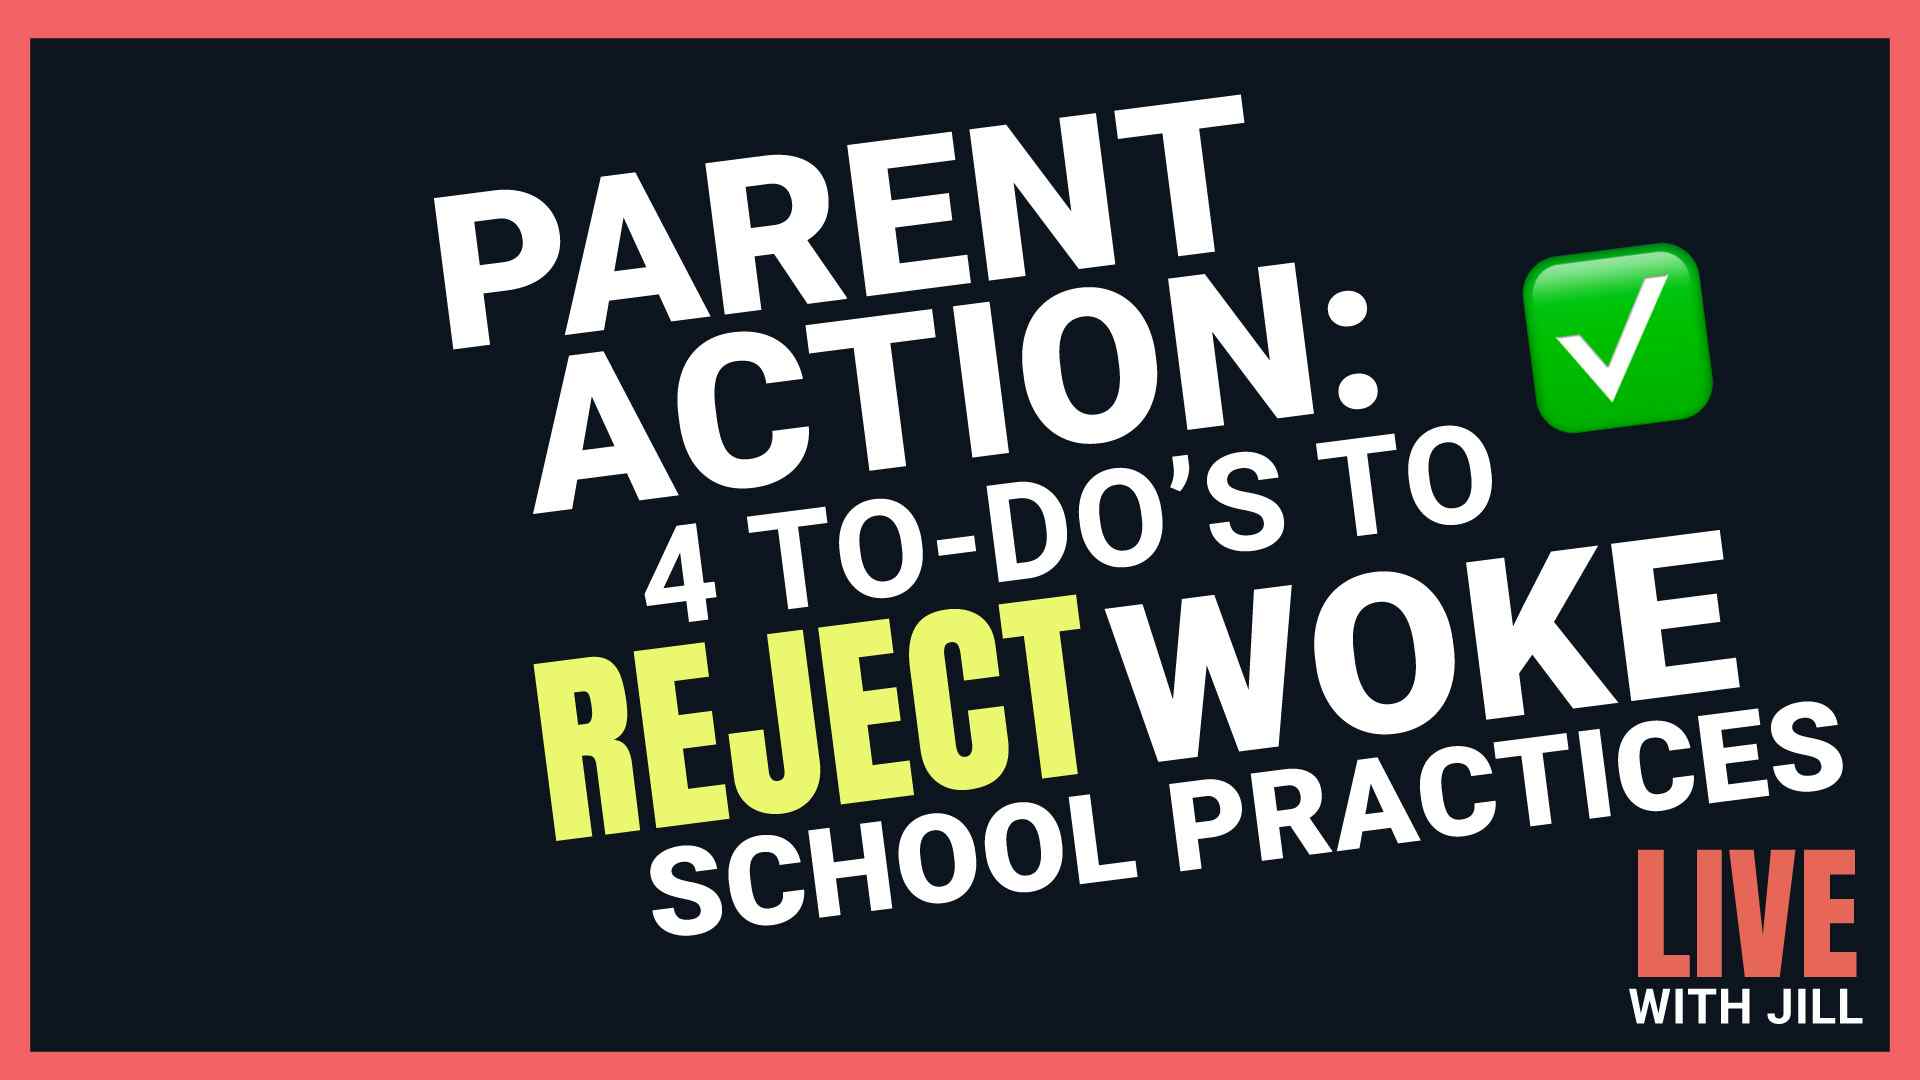 4 To-Do’s to Reject Woke School Practices